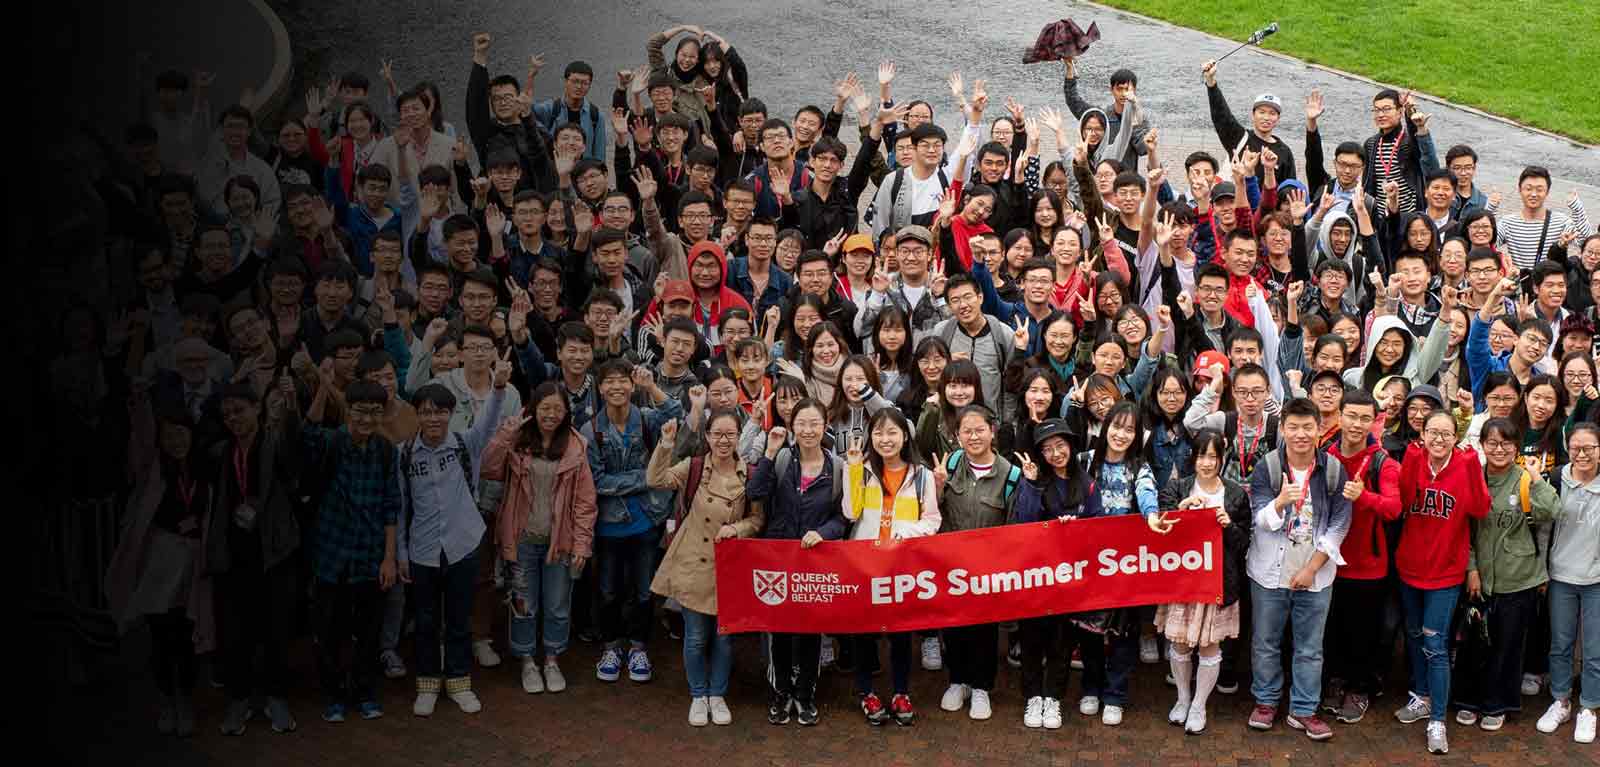 Large group of Summer School students posing with a red banner